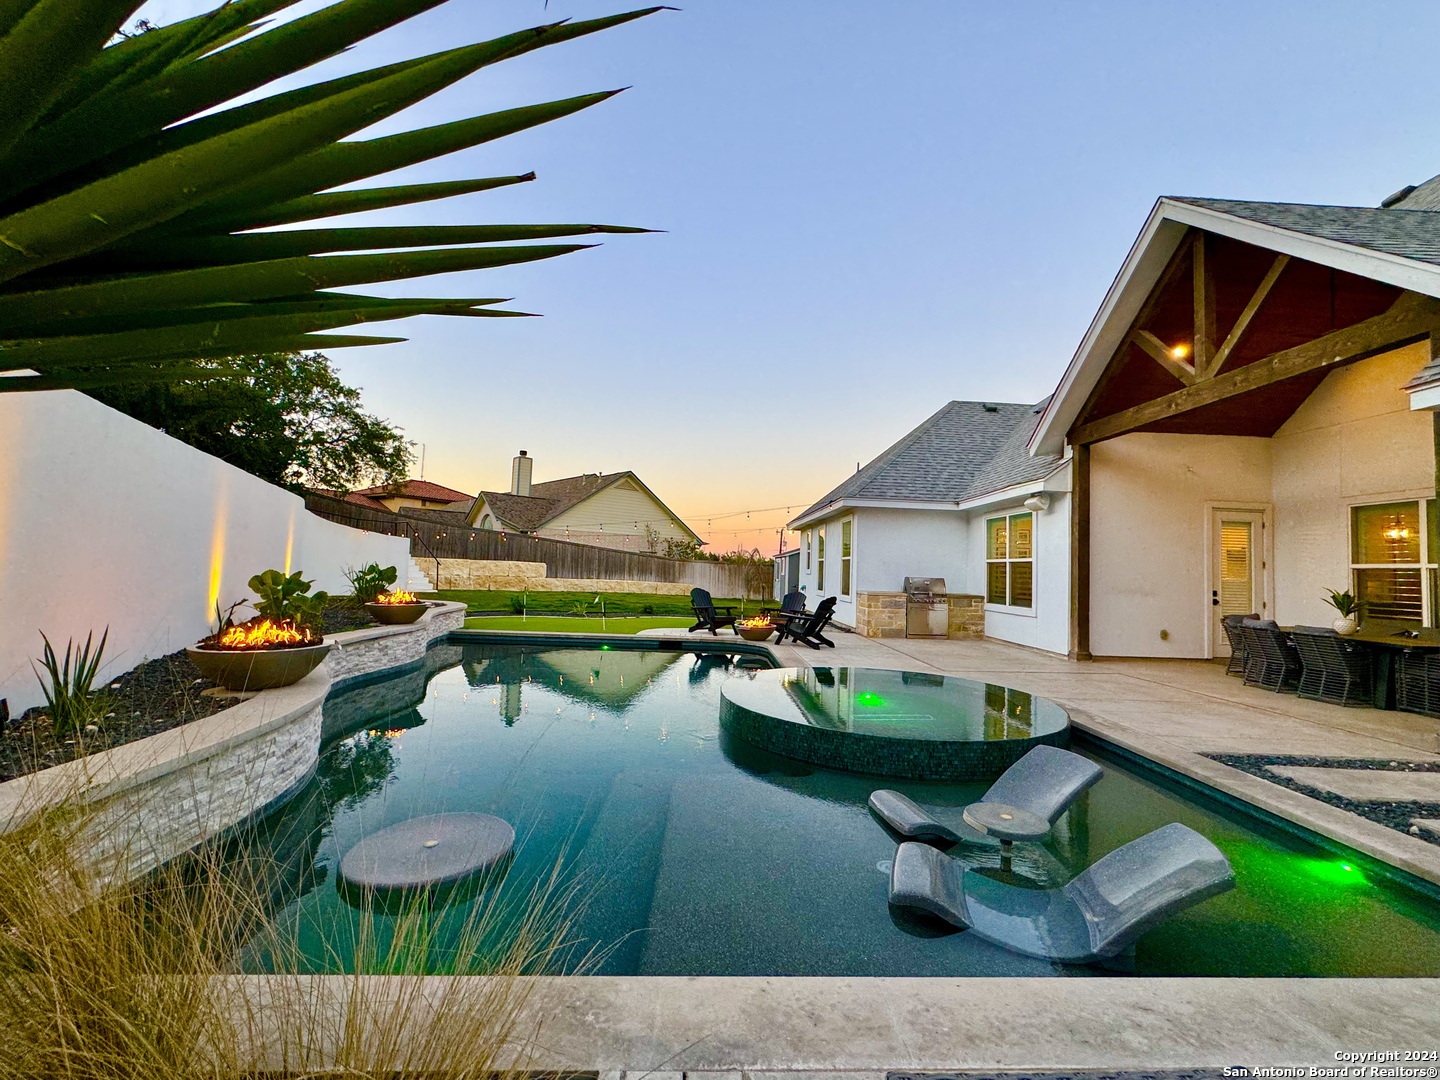 a view of house with backyard outdoor seating area and swimming pool